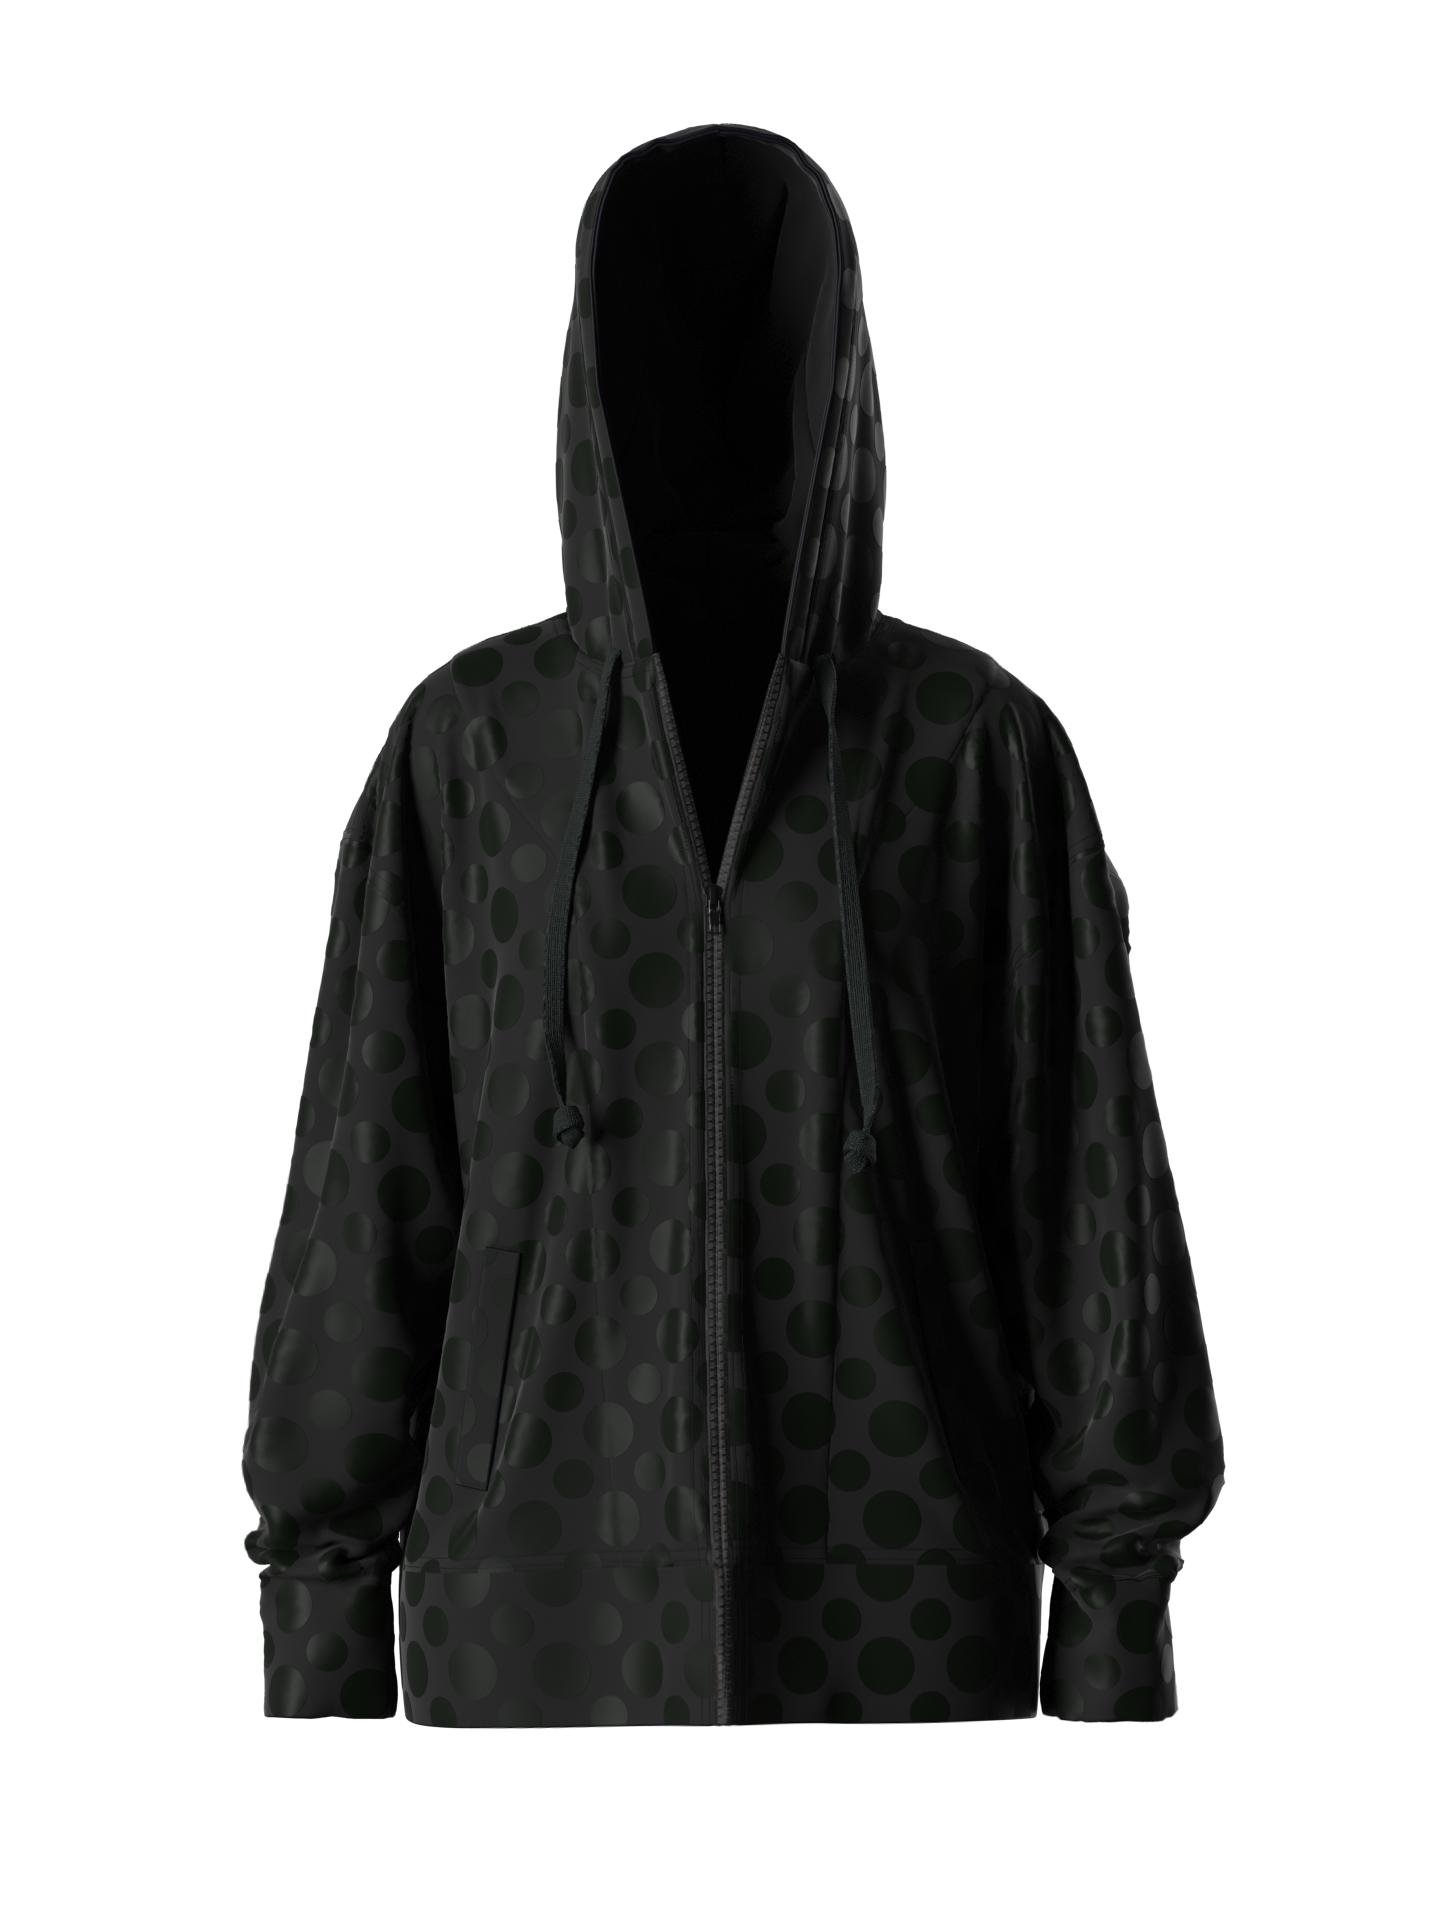 The James Hoodie - Maria Dot (Unisex) by ASSEMBLY.FASHION NYFW 2021 DROP NO.01